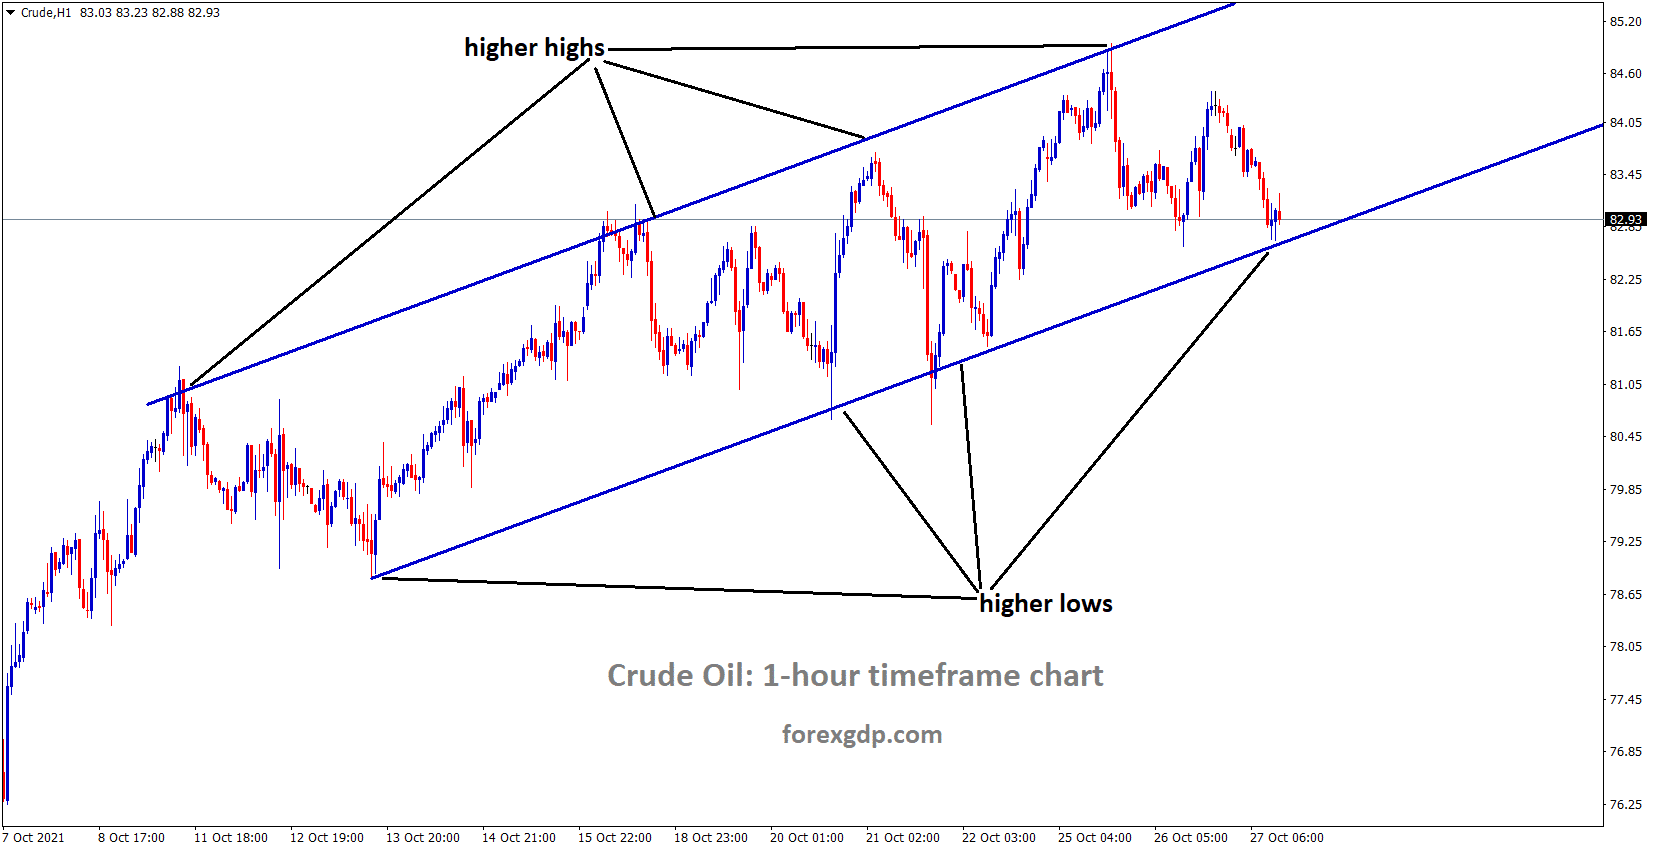 Crudeoil is moving in an ascending channel and the market is standing at the higher low area of Ascending trendline.